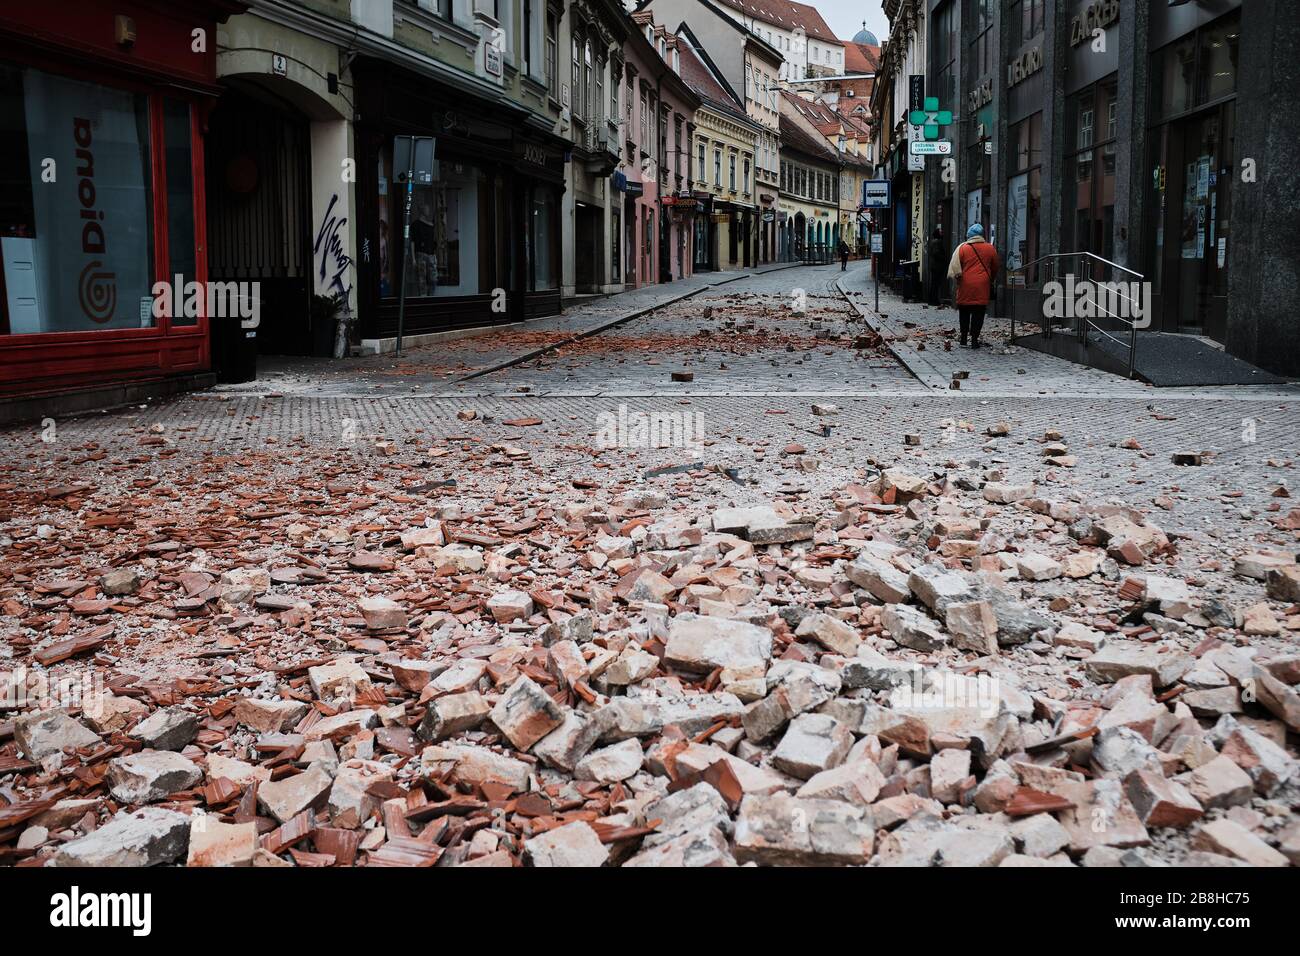 Amidst COVID 19 pandemic, the capital of Croatia, Zagreb got struck by 5.5 magnitude earthquake on 22.3.2020. Several people got injured one severely. Stock Photo